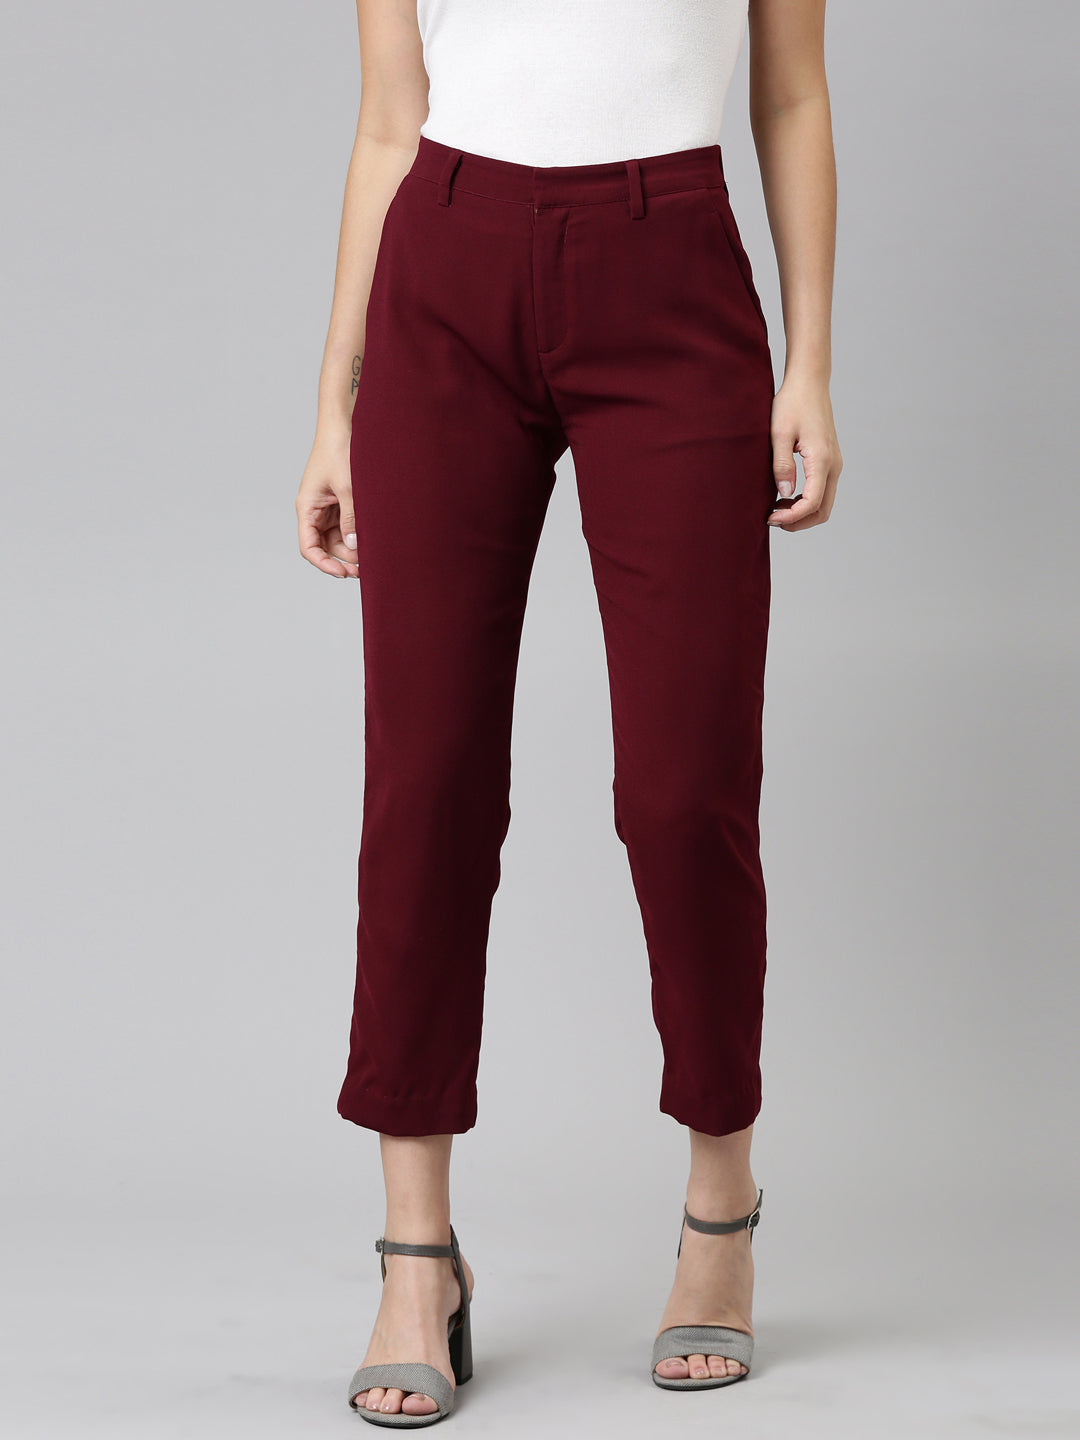 Buy all about you Trousers & Lowers online - Women - 64 products | FASHIOLA  INDIA